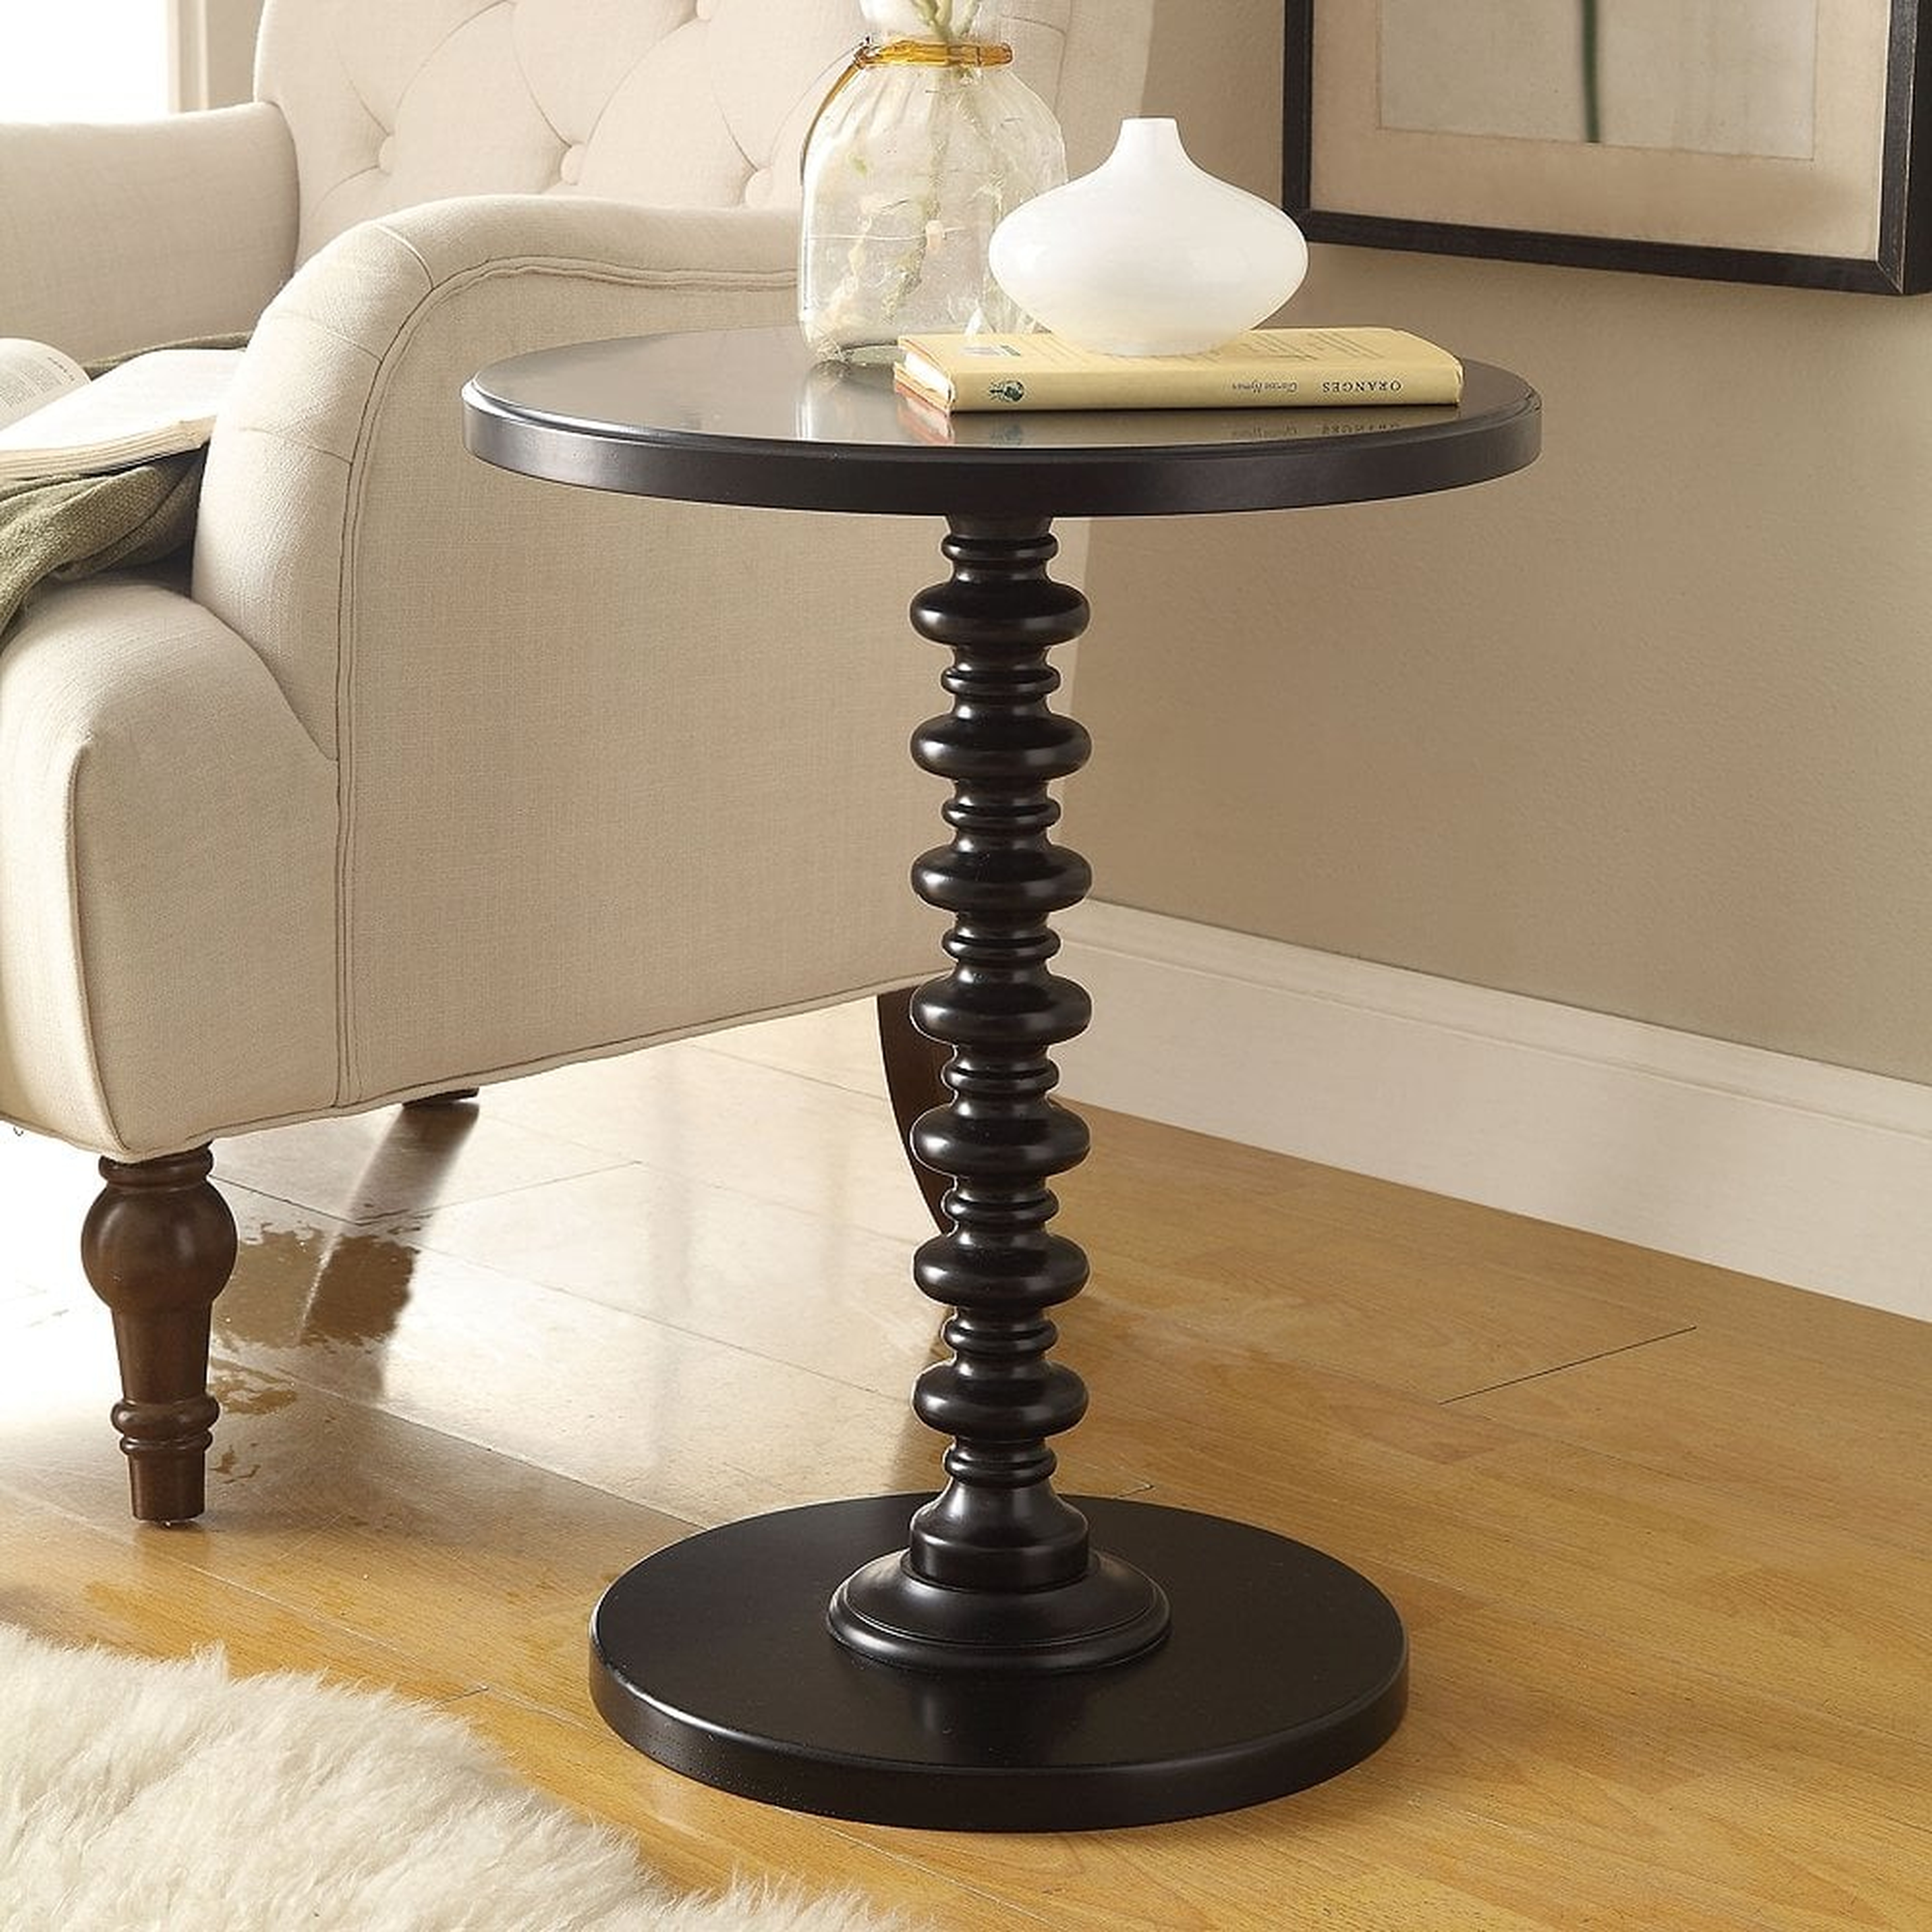 Acton 17" Wide Black Round Pedestal Wood Side Table - Style # 73C98 - Lamps Plus